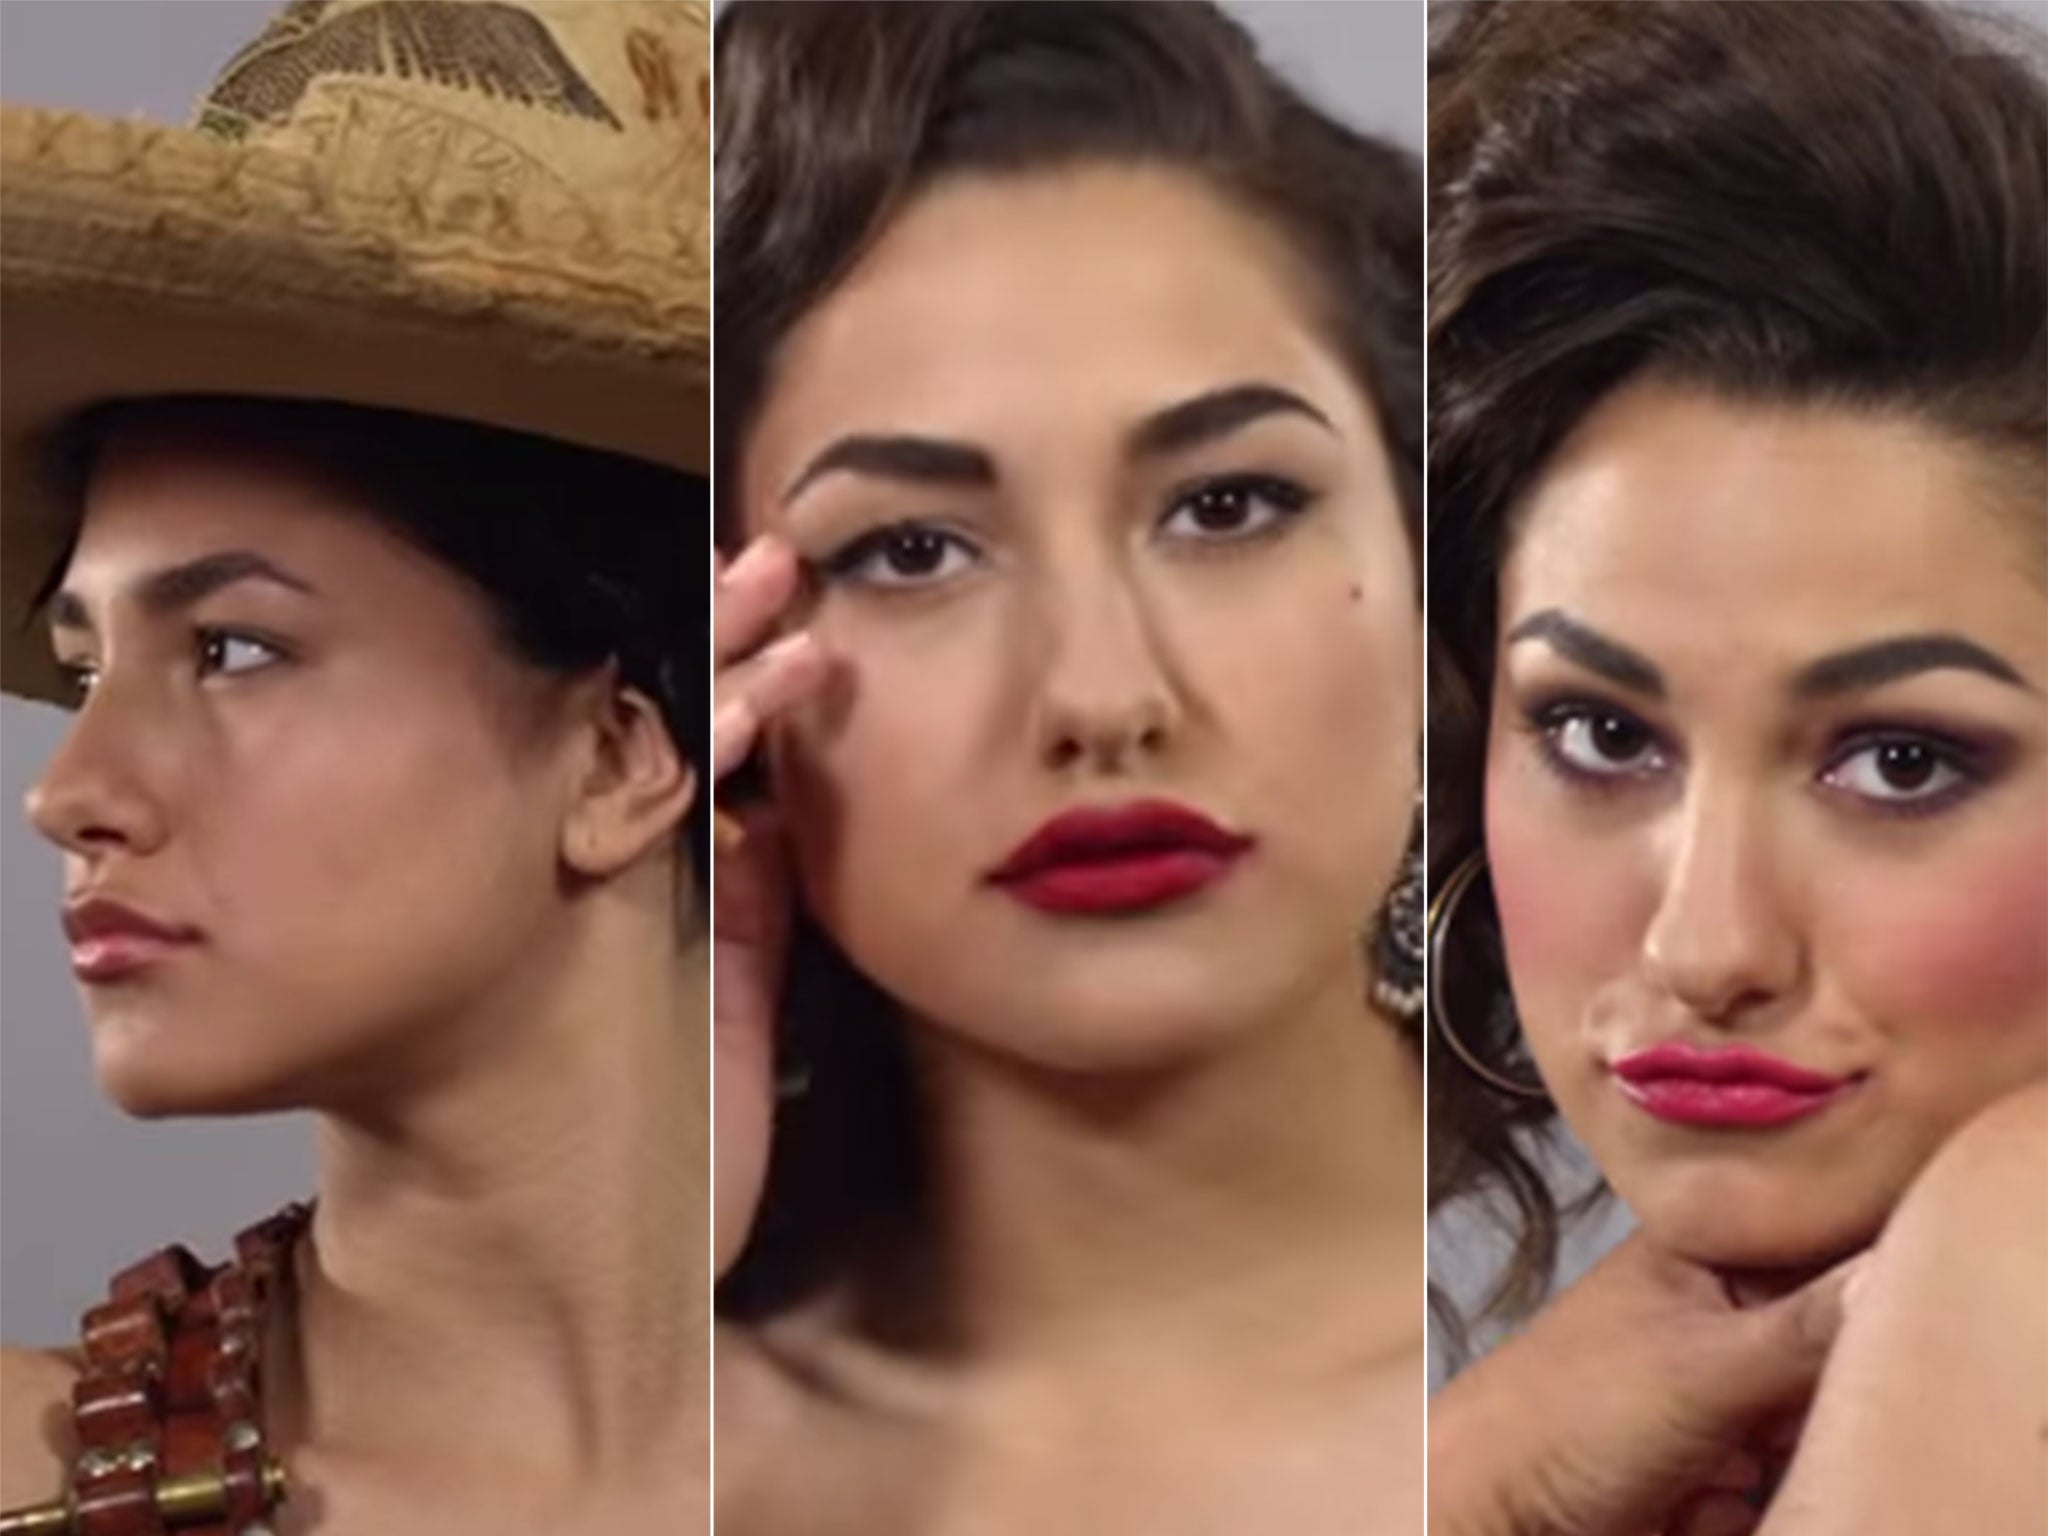 Mexican beauty: From the 1900s to 2010s